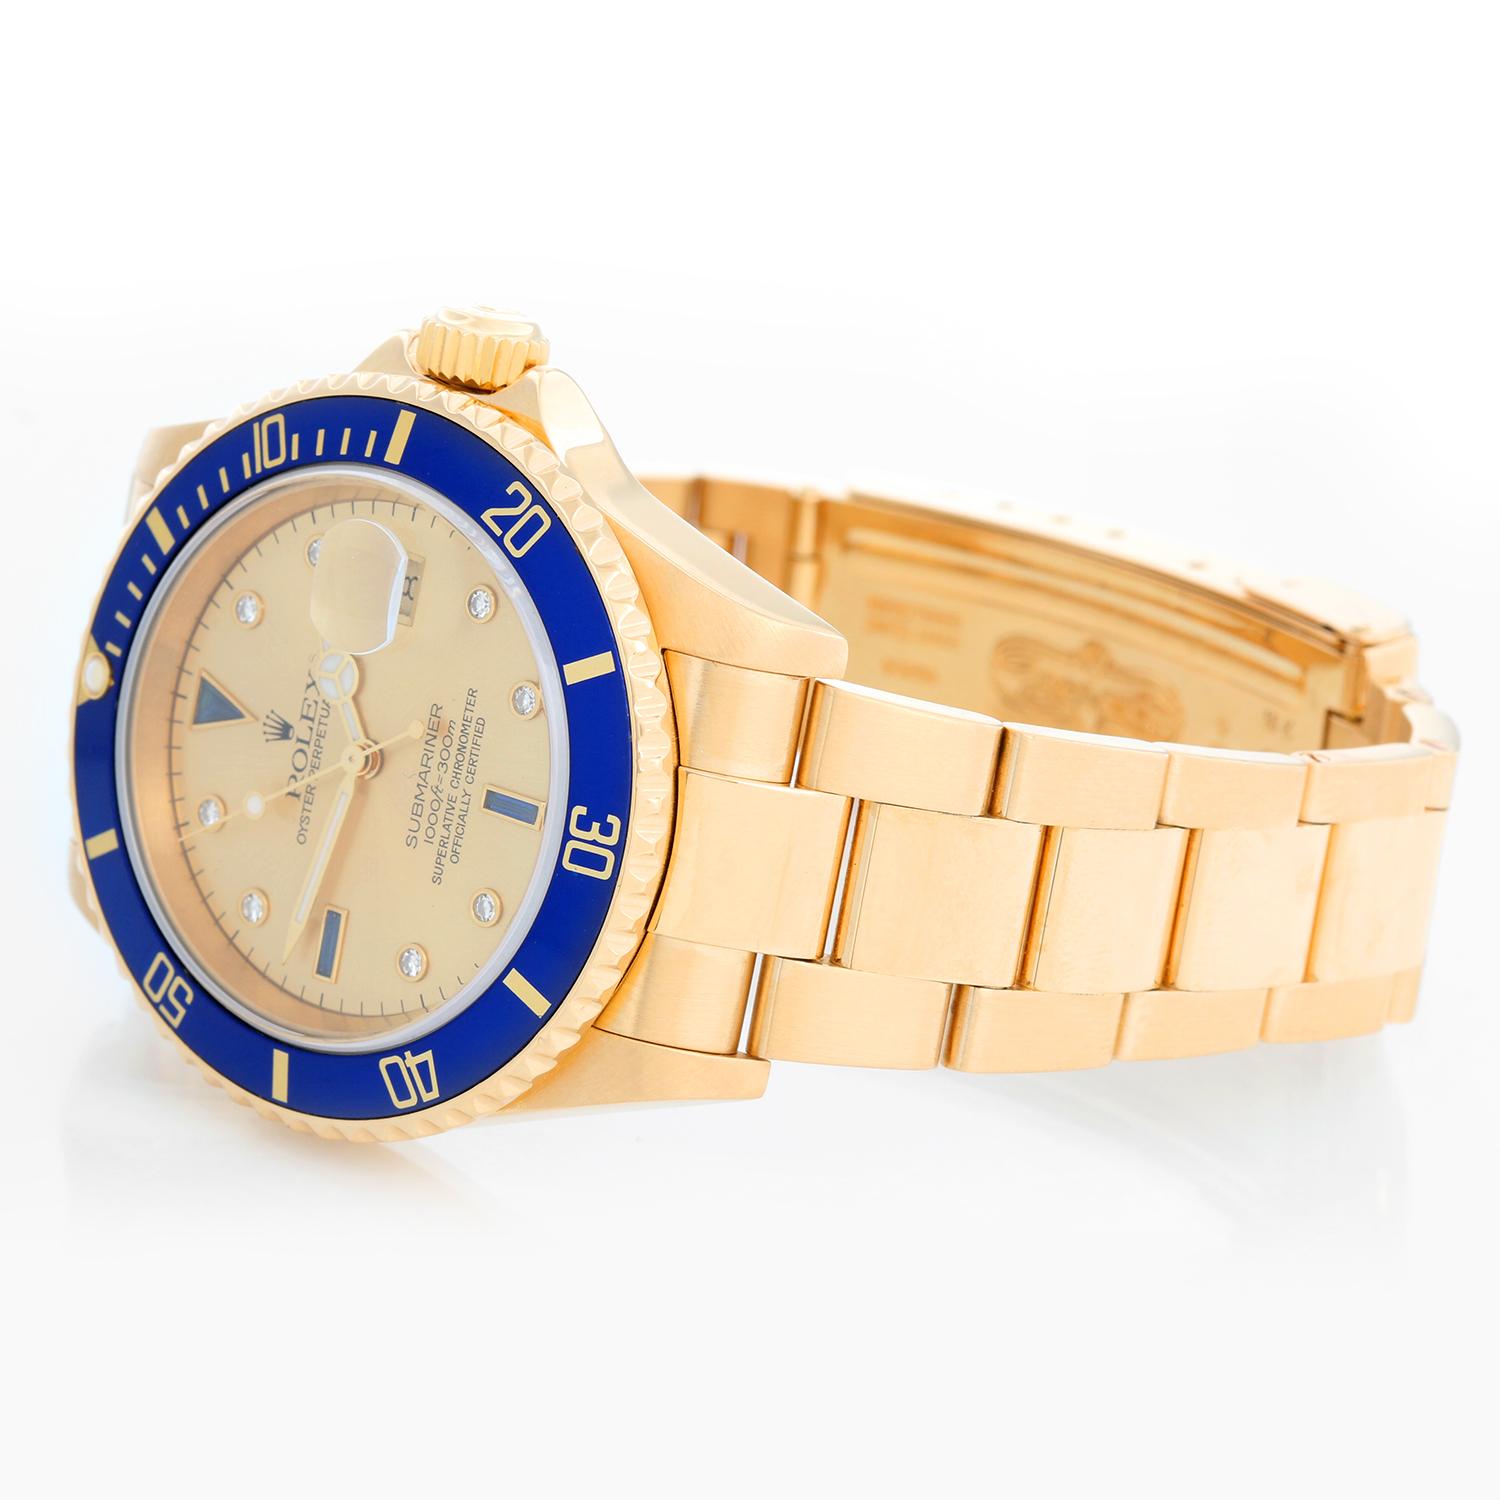 Rolex Submariner Men's 18k Gold Diver's Watch 16618 - Automatic winding, Quickset, sapphire crystal. 18k yellow gold case with rotating bezel with blue insert (40mm diameter).  Genuine Rolex Champagne Serti dial. 18k yellow gold Oyster bracelet with